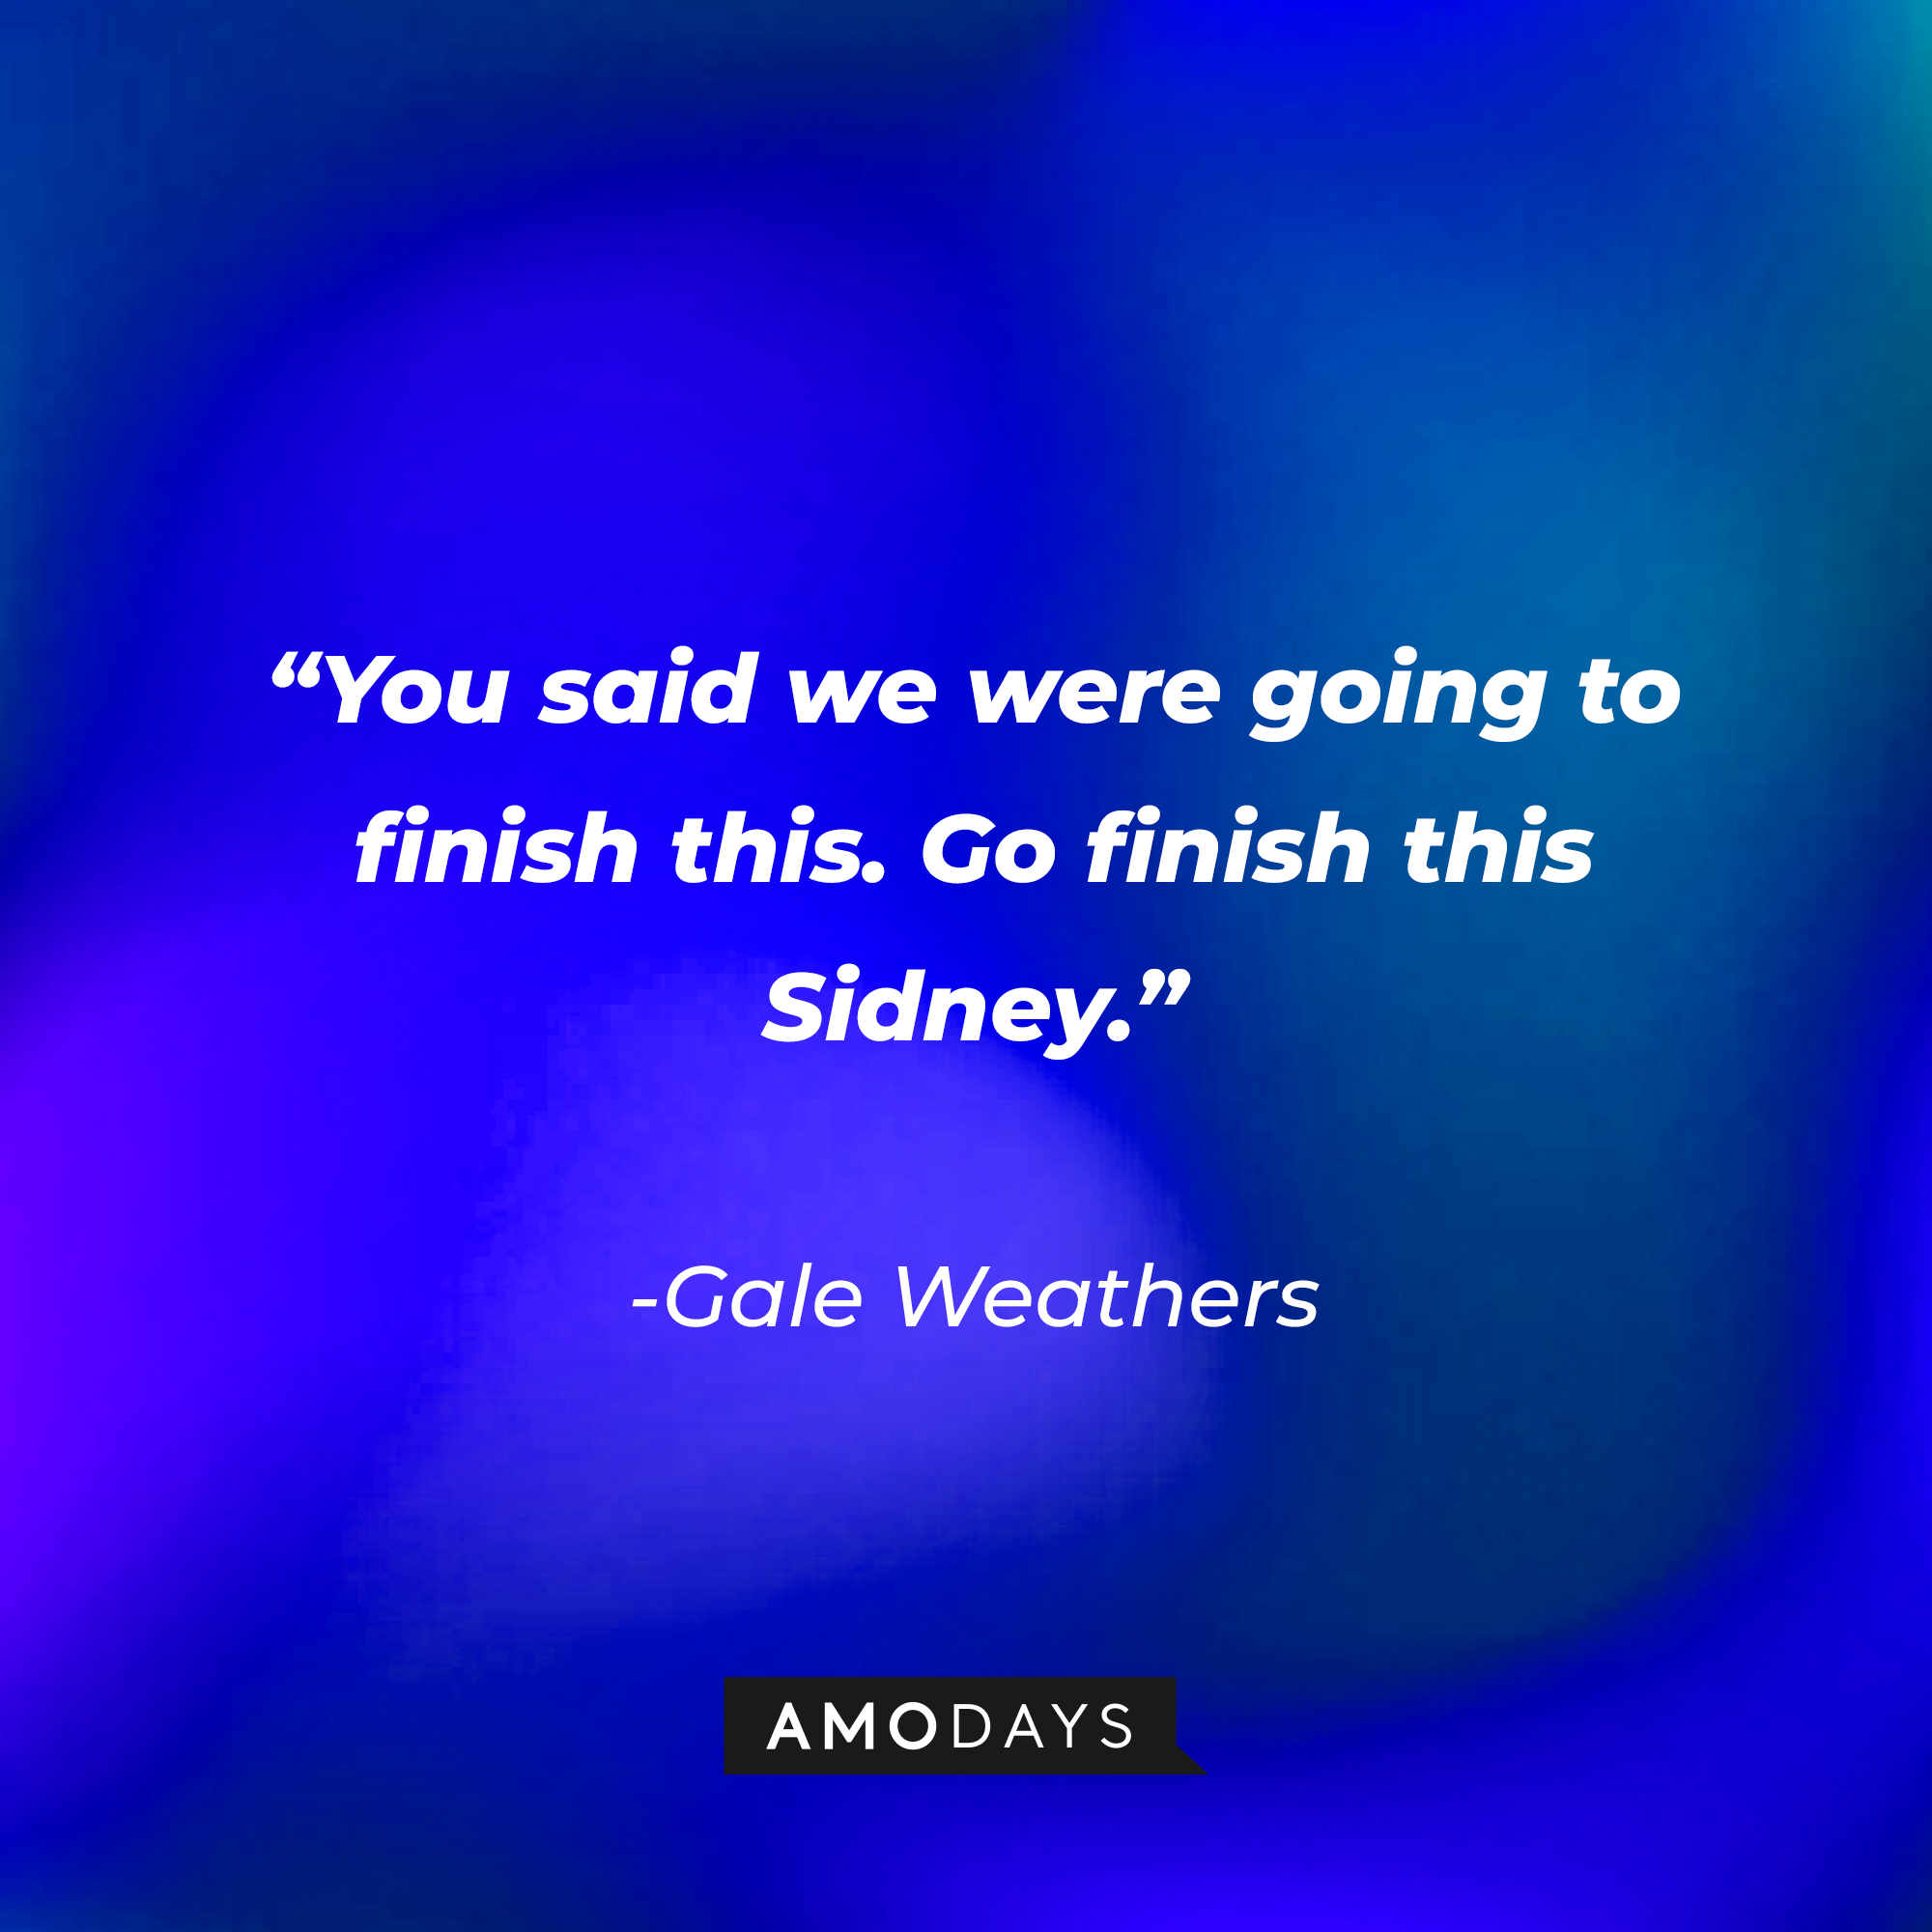 Gale Weather’s quote from “Scream ‘(2020)’”: "You said we were going to finish this. Go finish this Sidney." | Source: AmoDays